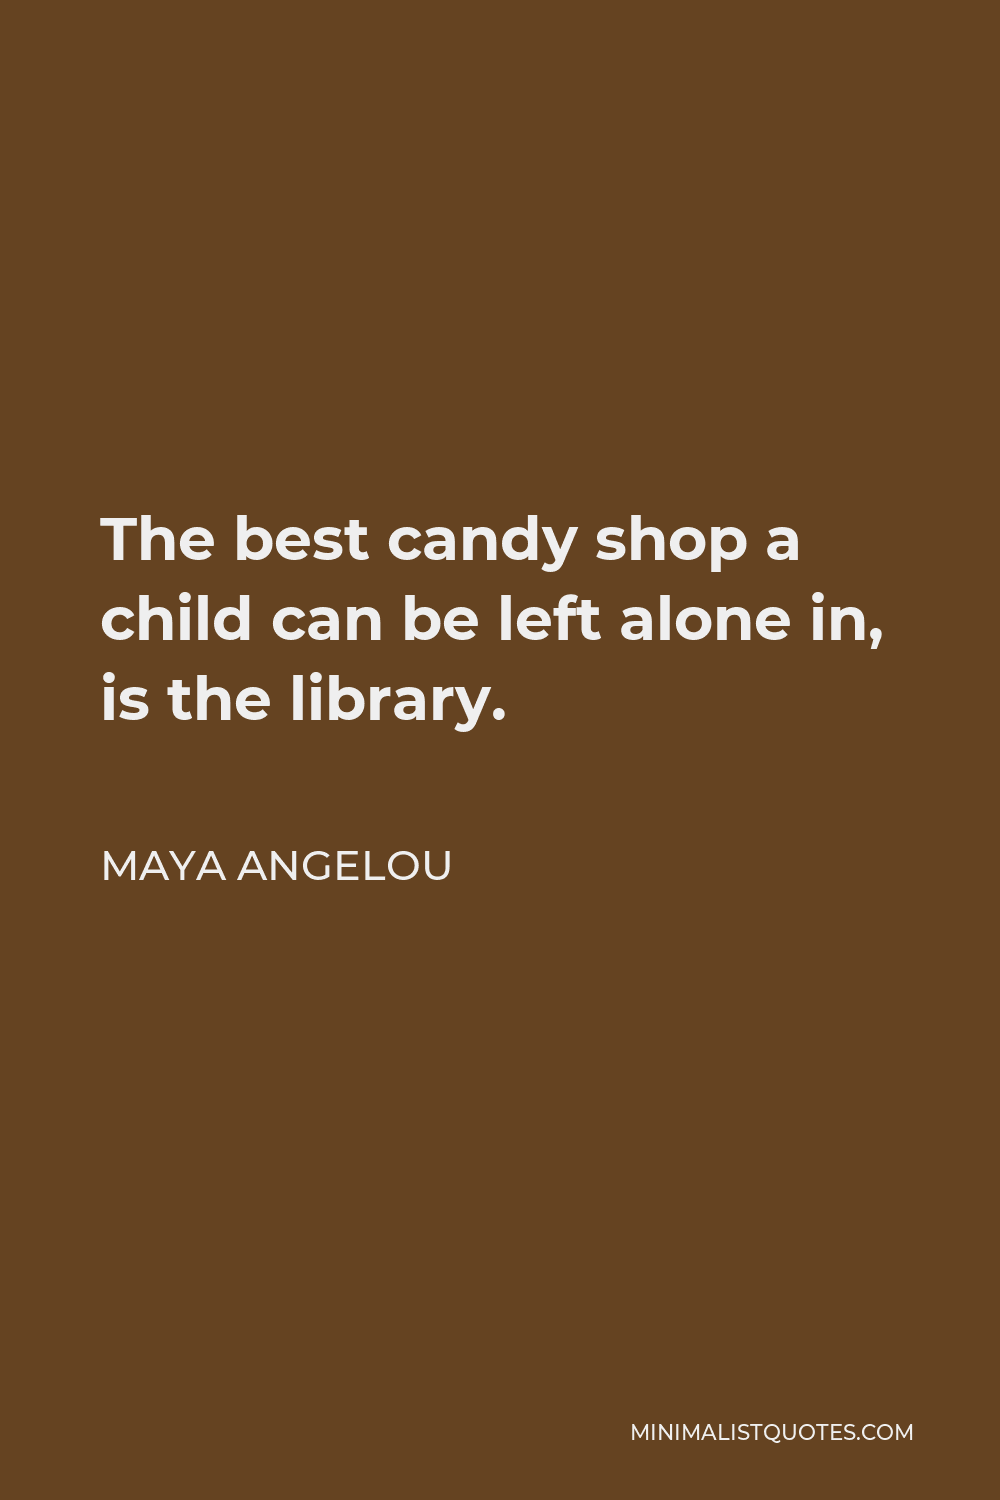 Maya Angelou Quote - The best candy shop a child can be left alone in, is the library.